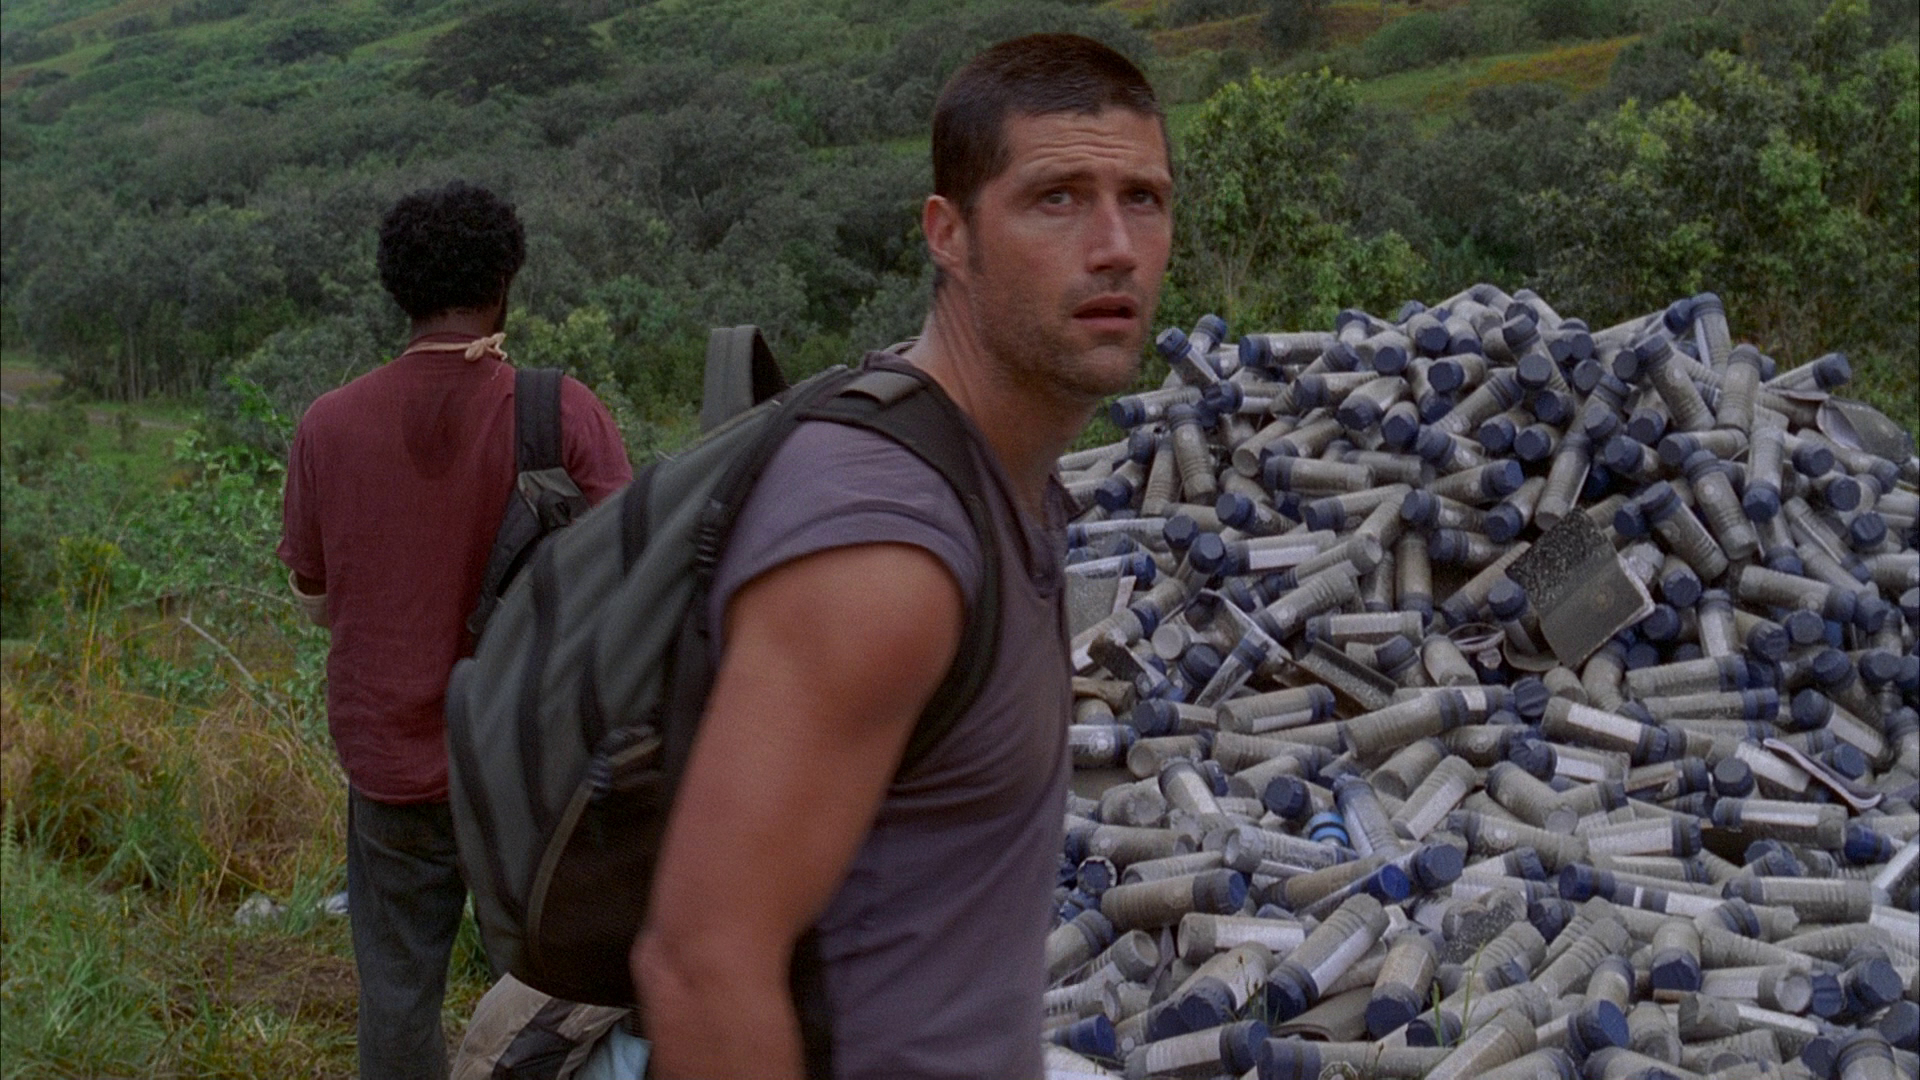 LOST S2 E23/24 “Live Together, Die Alone” | EYG- Embrace Your Geekness